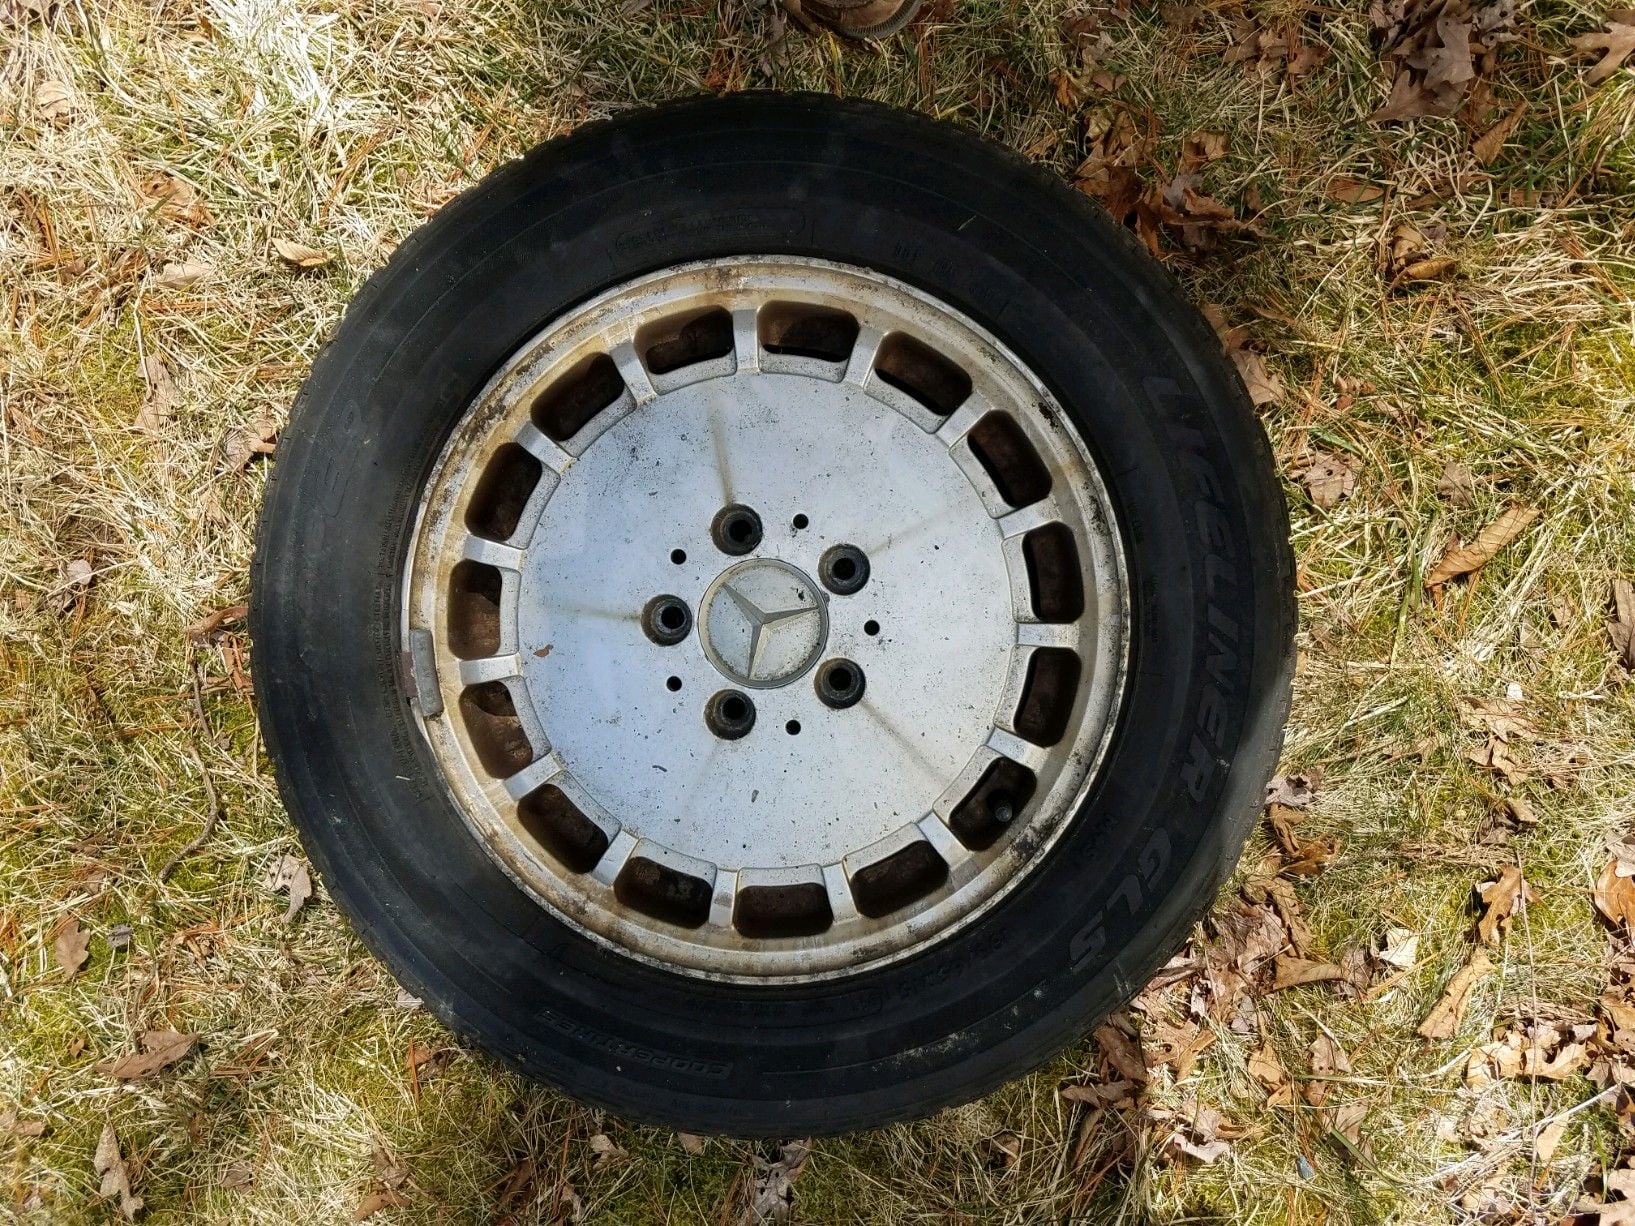 Wheels and Tires/Axles - 4 rims (and crappy tires) from a 1989 300E - Used - 1989 Mercedes-Benz 300E - Dartmouth, MA 02748, United States